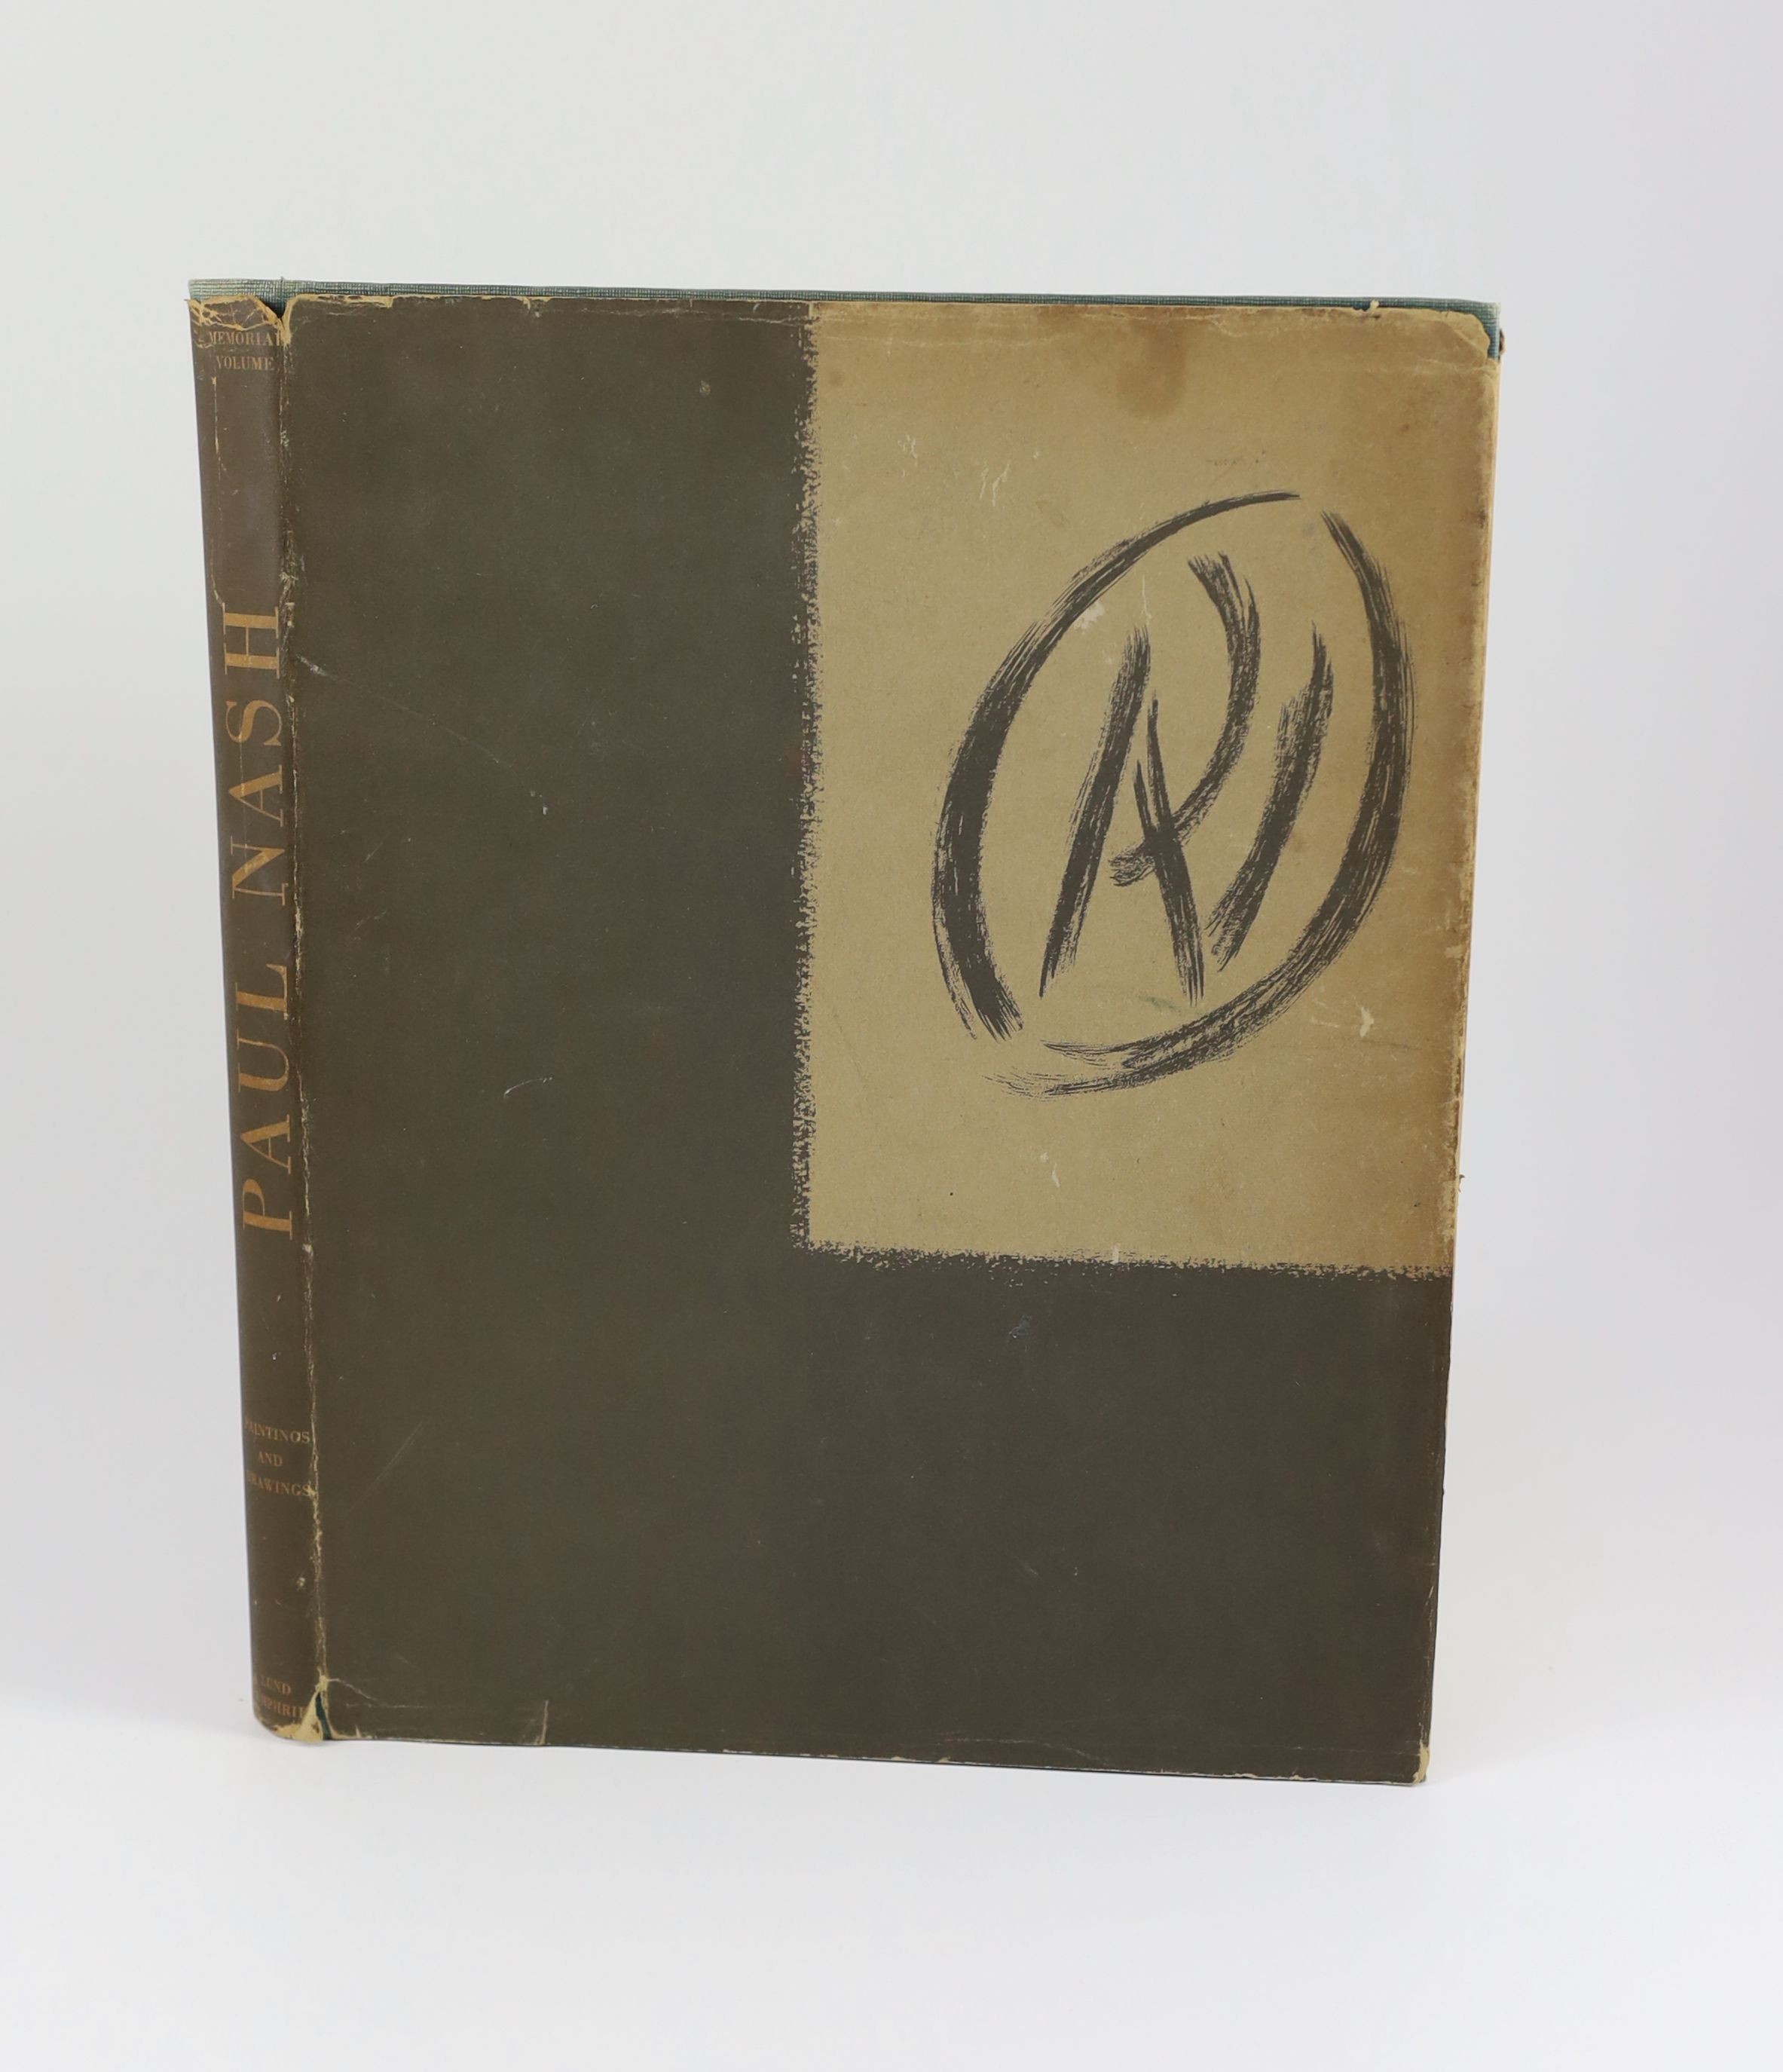 Nash, Paul - Outline. 1st ed. Complete with 3 plates, 2 being coloured, and numerous full page text illus. Publishers cloth with Letters direct on upper and spine and original illustrated d/j. 8vo Faber and Faber Limited